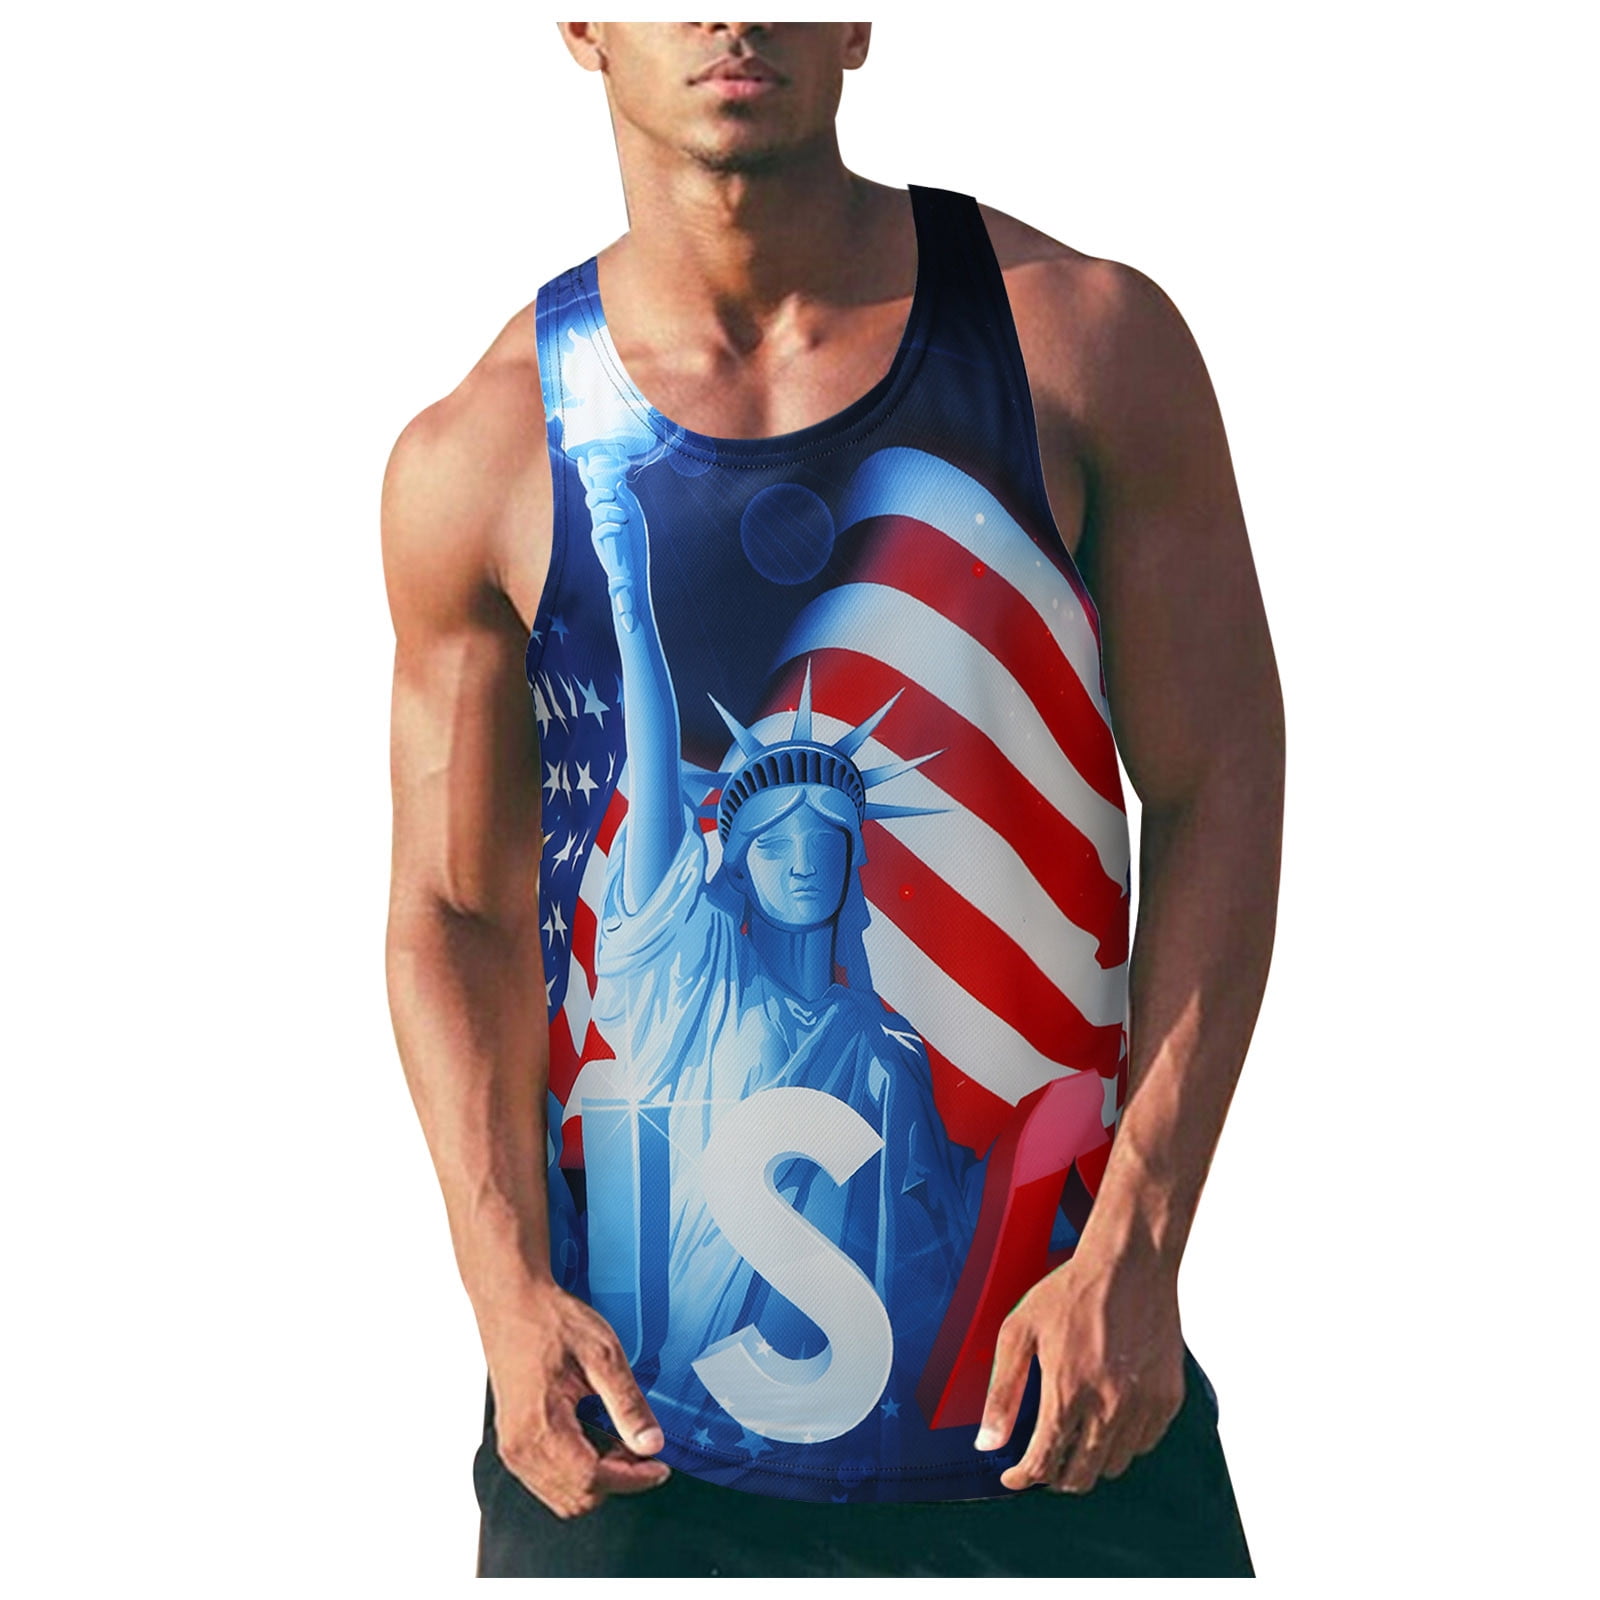 Mens 3D Tank Top Novelty Graphic Breathable Quick Dry Sleeveless Shirt S-3XL 